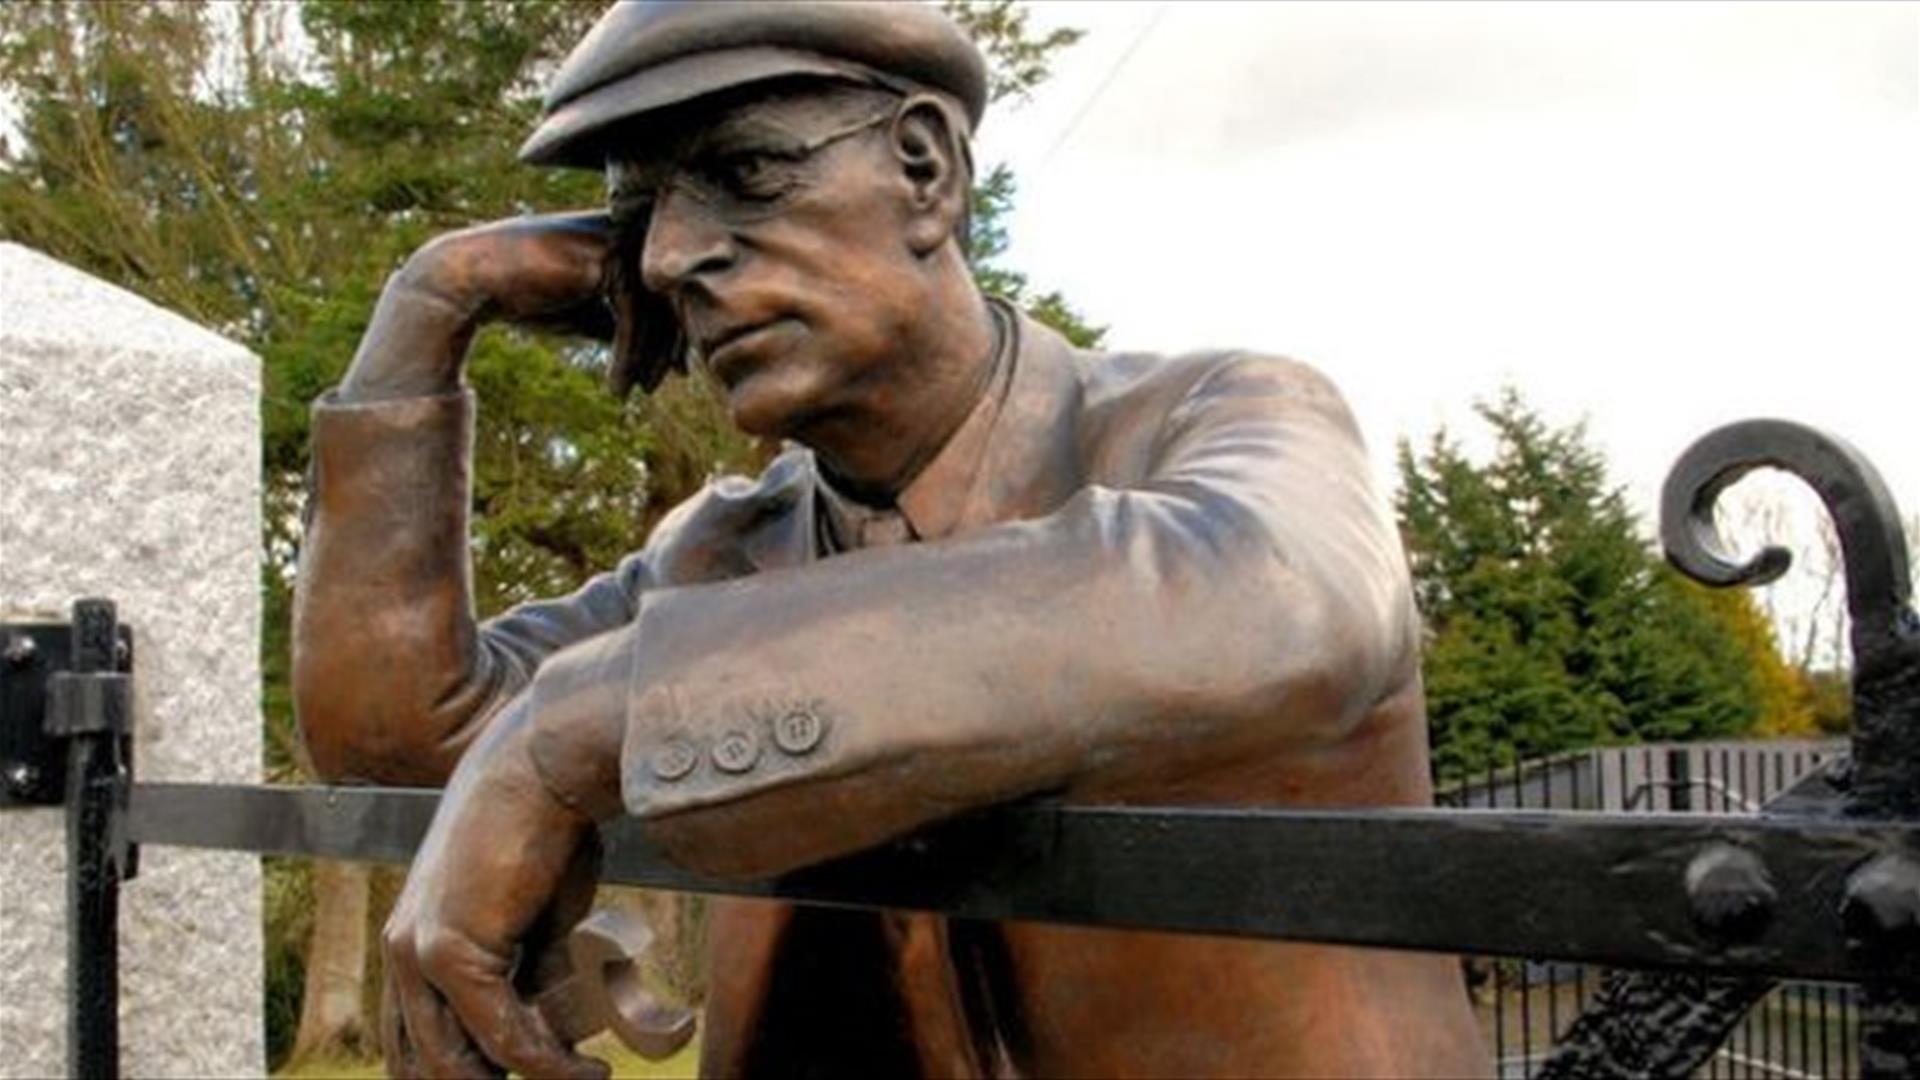 Image is of Harry Ferguson statue at his homestead in Growell, Hillsborough